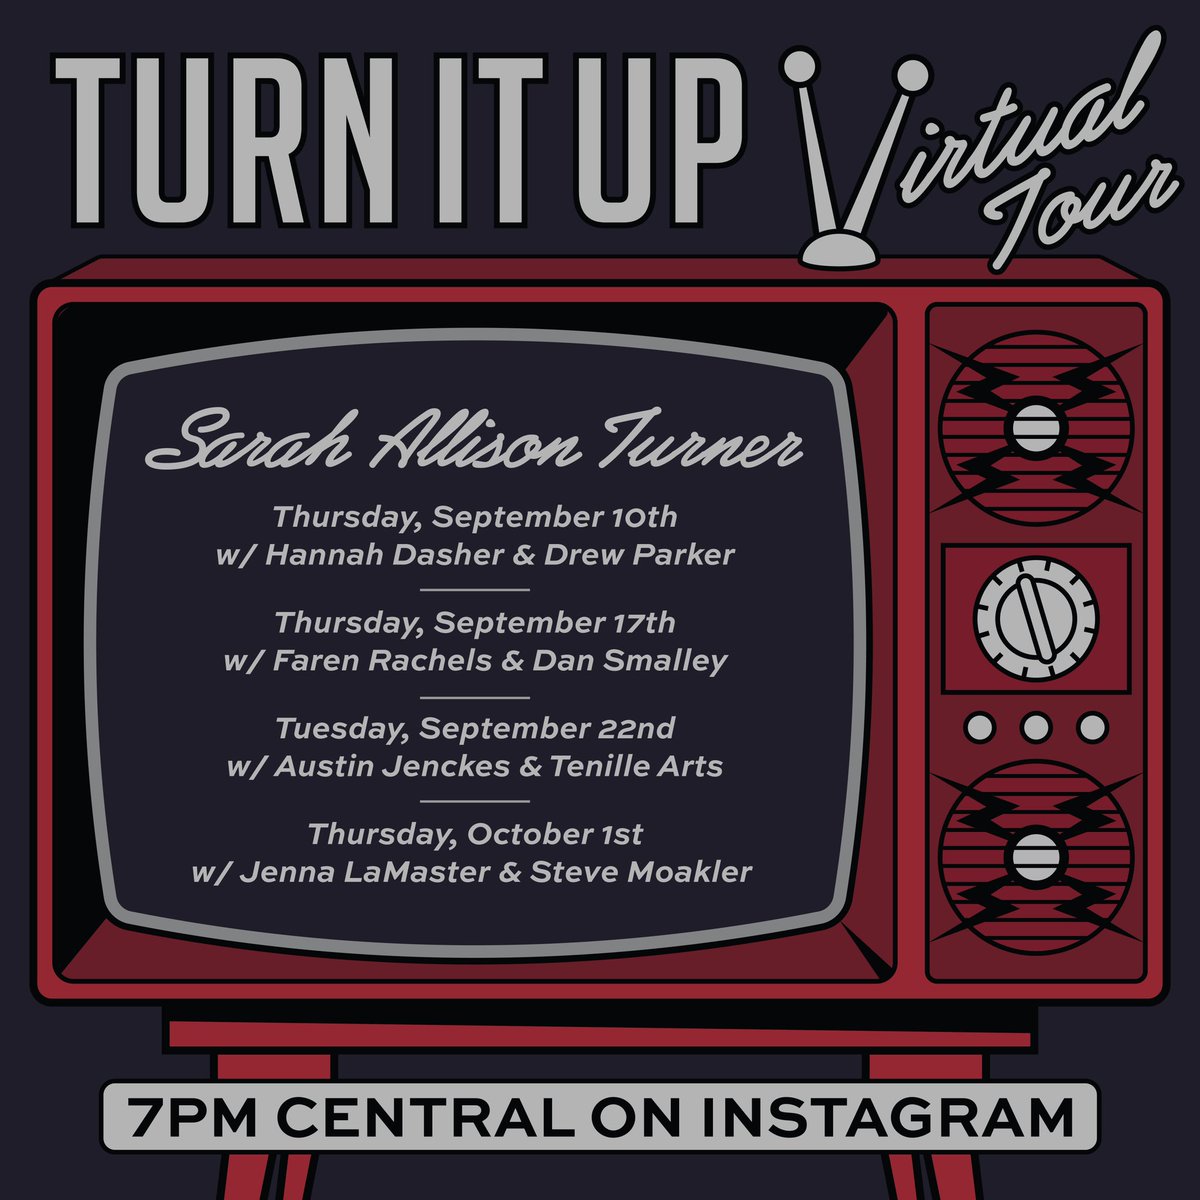 One week from today over on @instagram! Can’t wait swap songs with this crew🤘🏻#TurnItUp